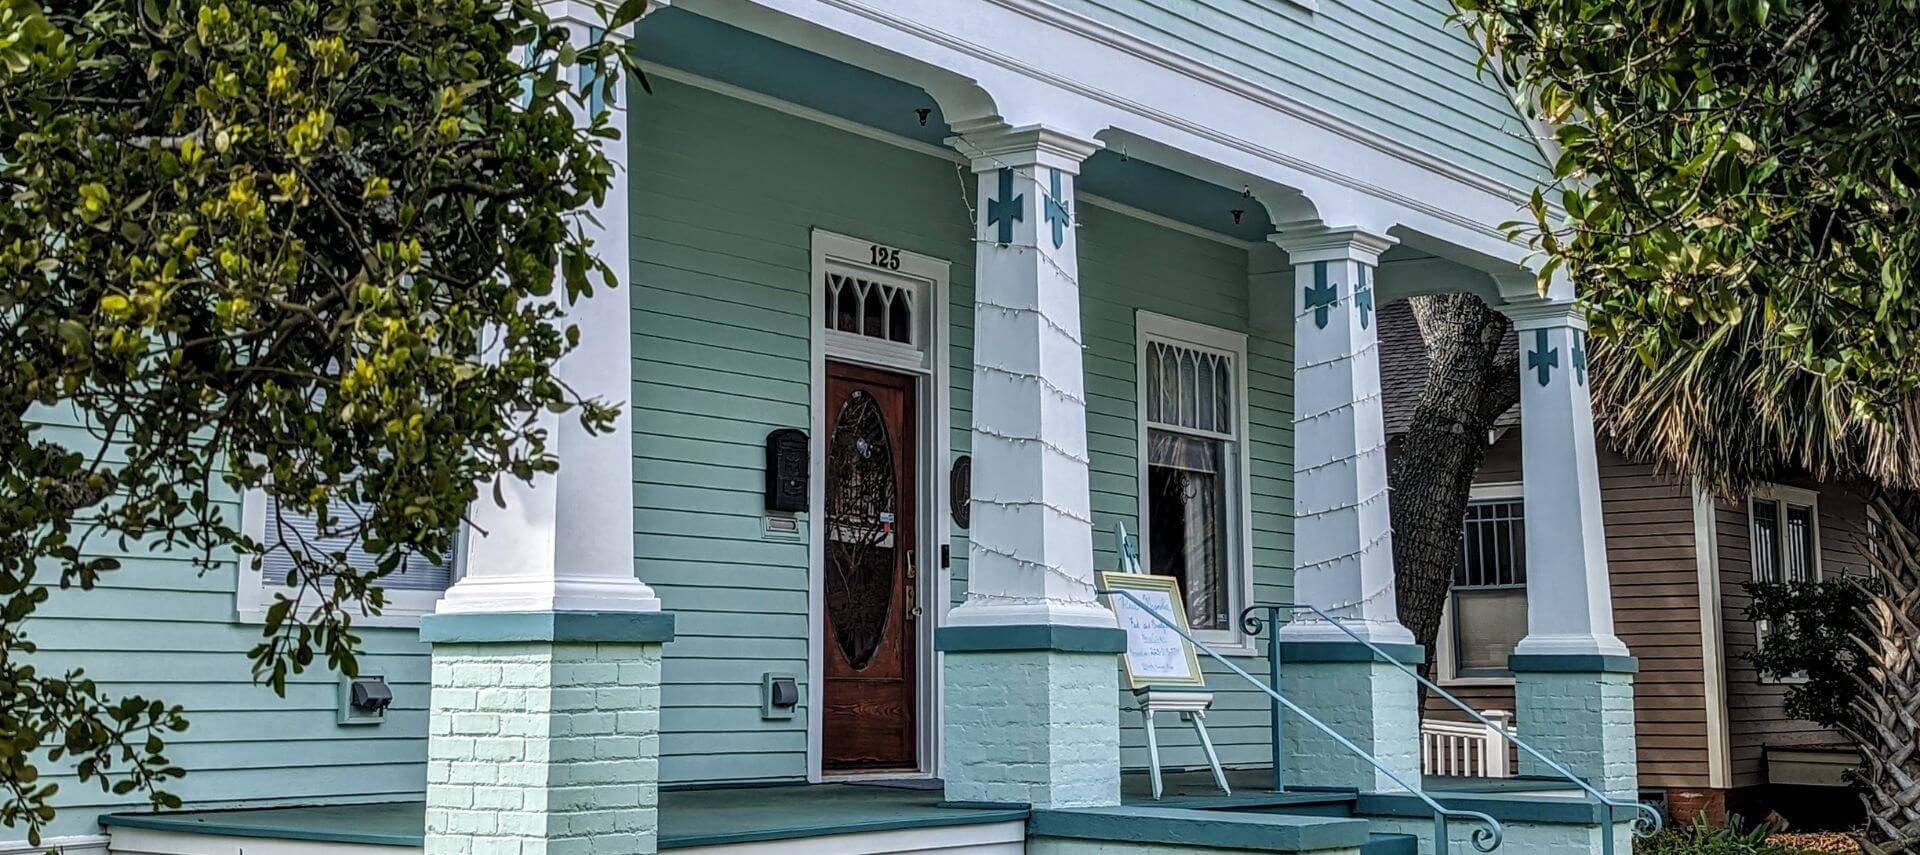 A green Victorian house's front porch with green and white pillars